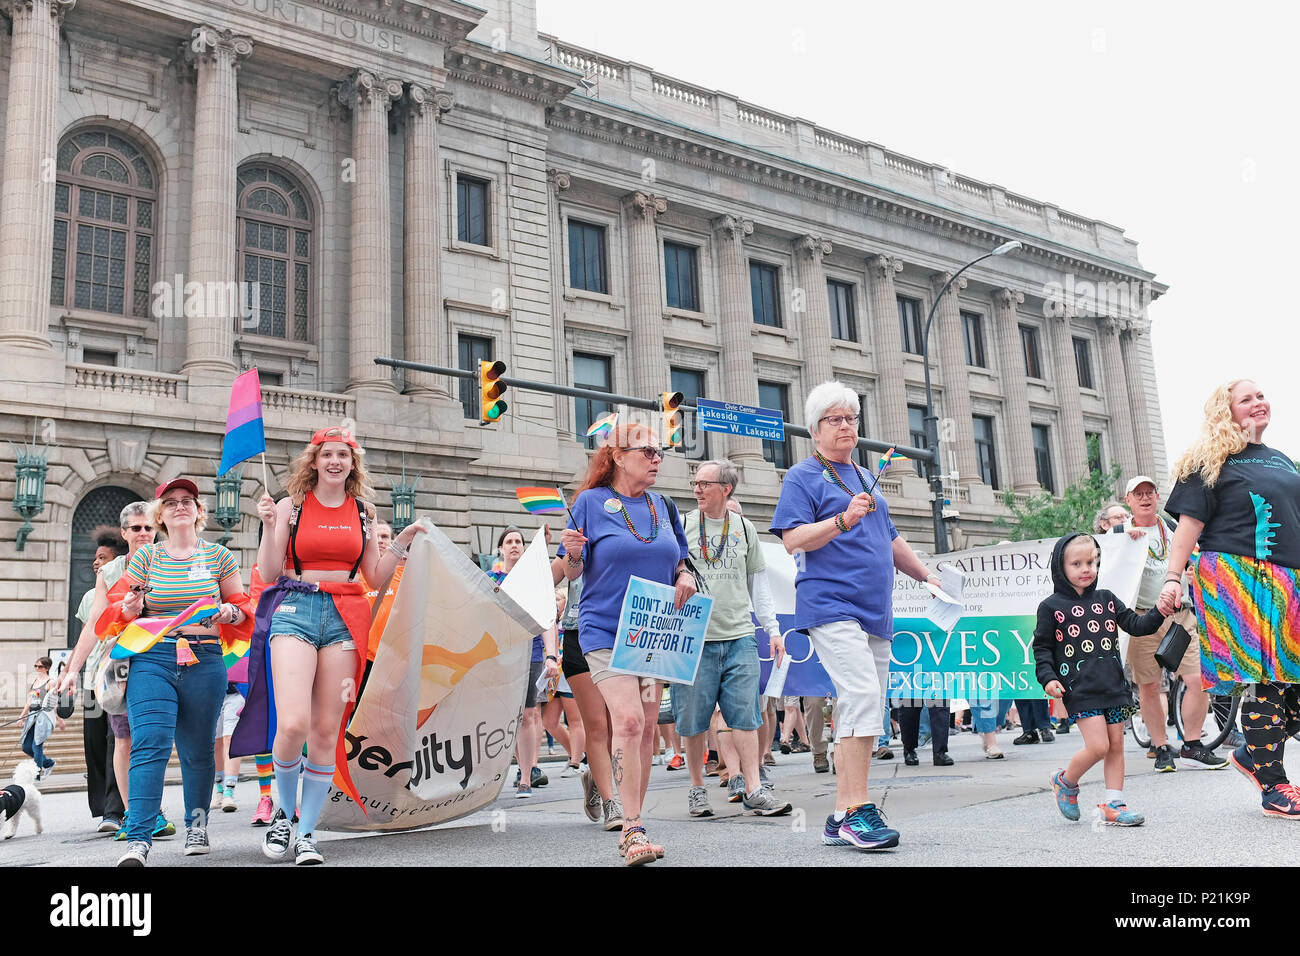 Participants in the 2018 Pride March in Cleveland, Ohio, USA make their way past the historic City Hall and Courthouse in downtown Cleveland. Stock Photo